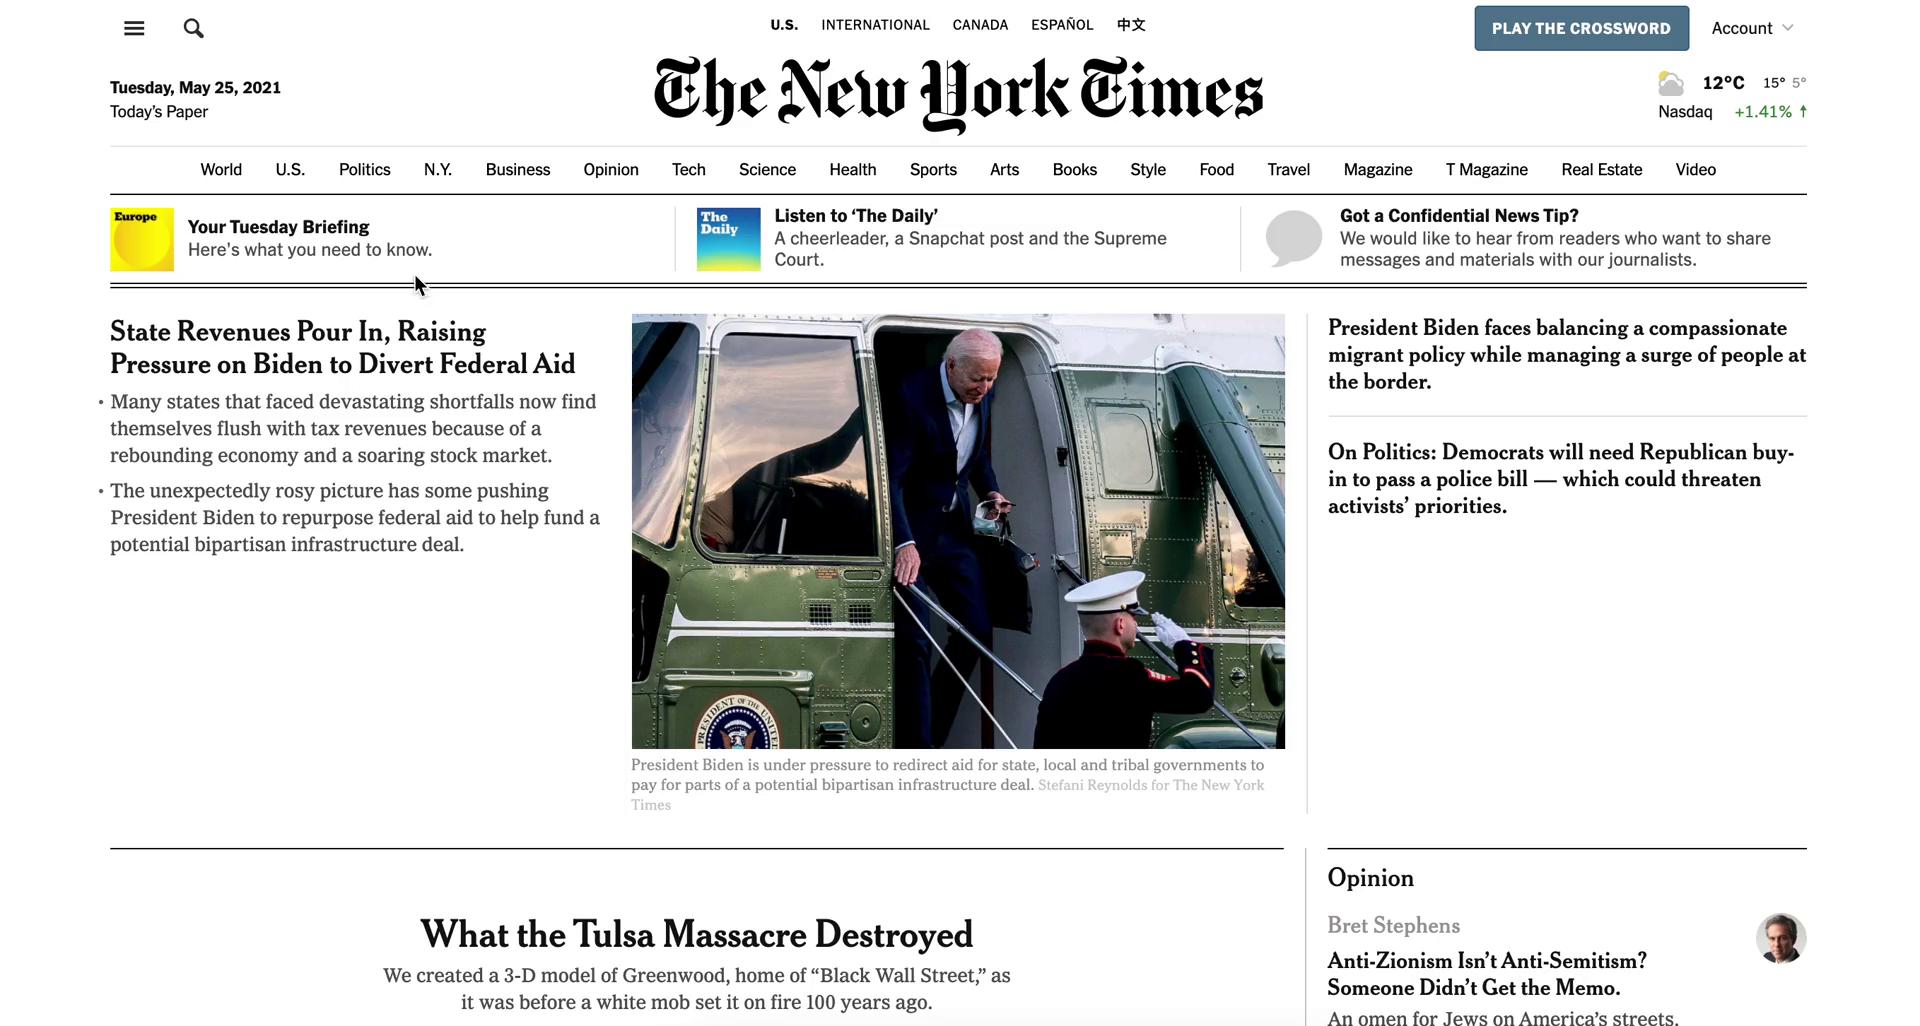 Screenshot of Discovering content on The New York Times